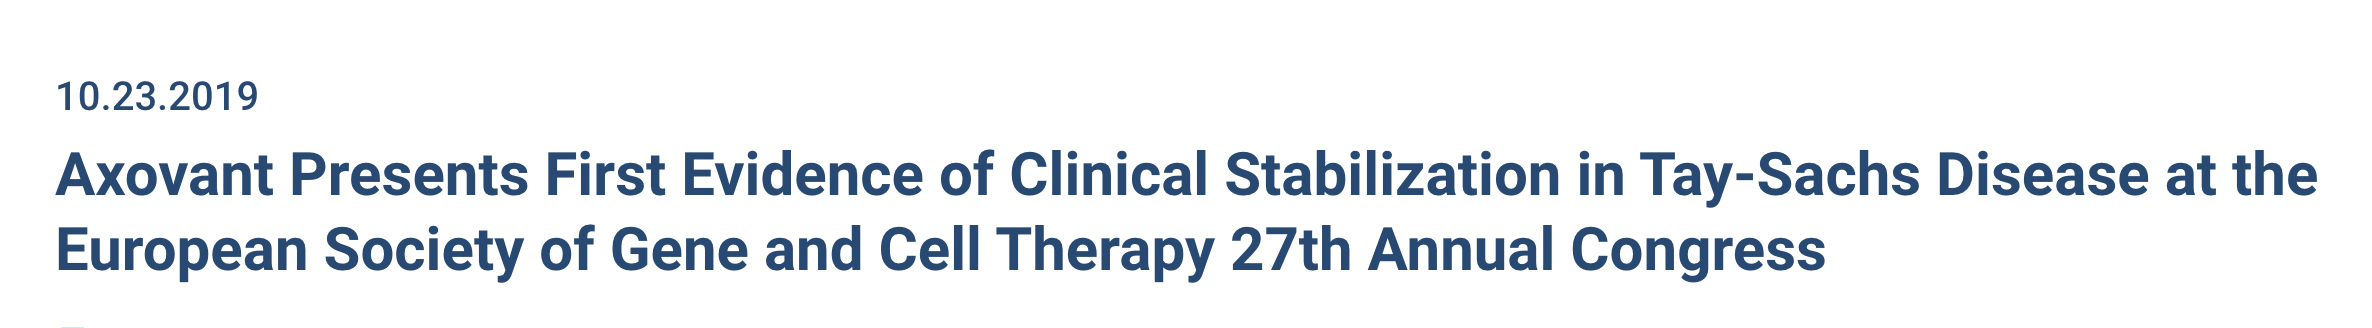 First Evidence of Clinical Stabilization in Tay-Sachs Disease